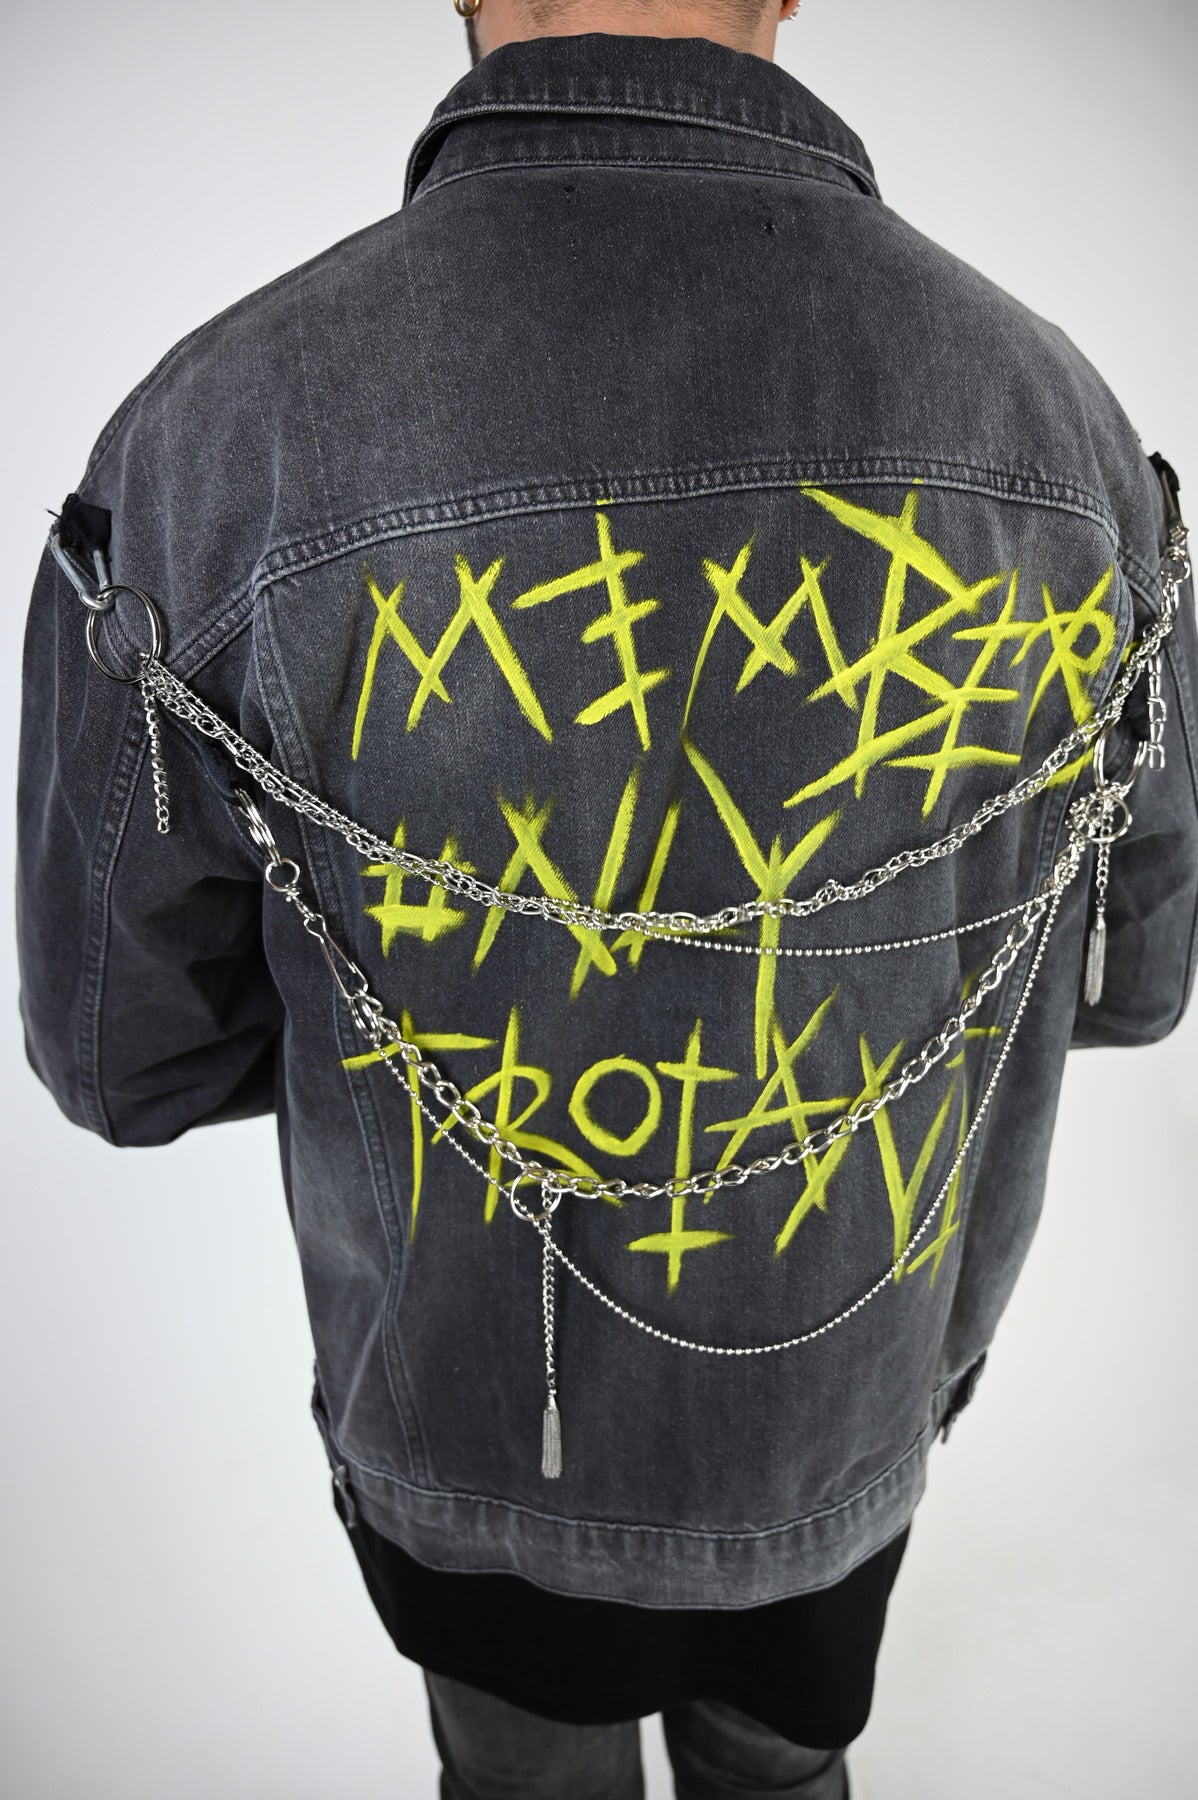 Chain Jacket / 1 of 1